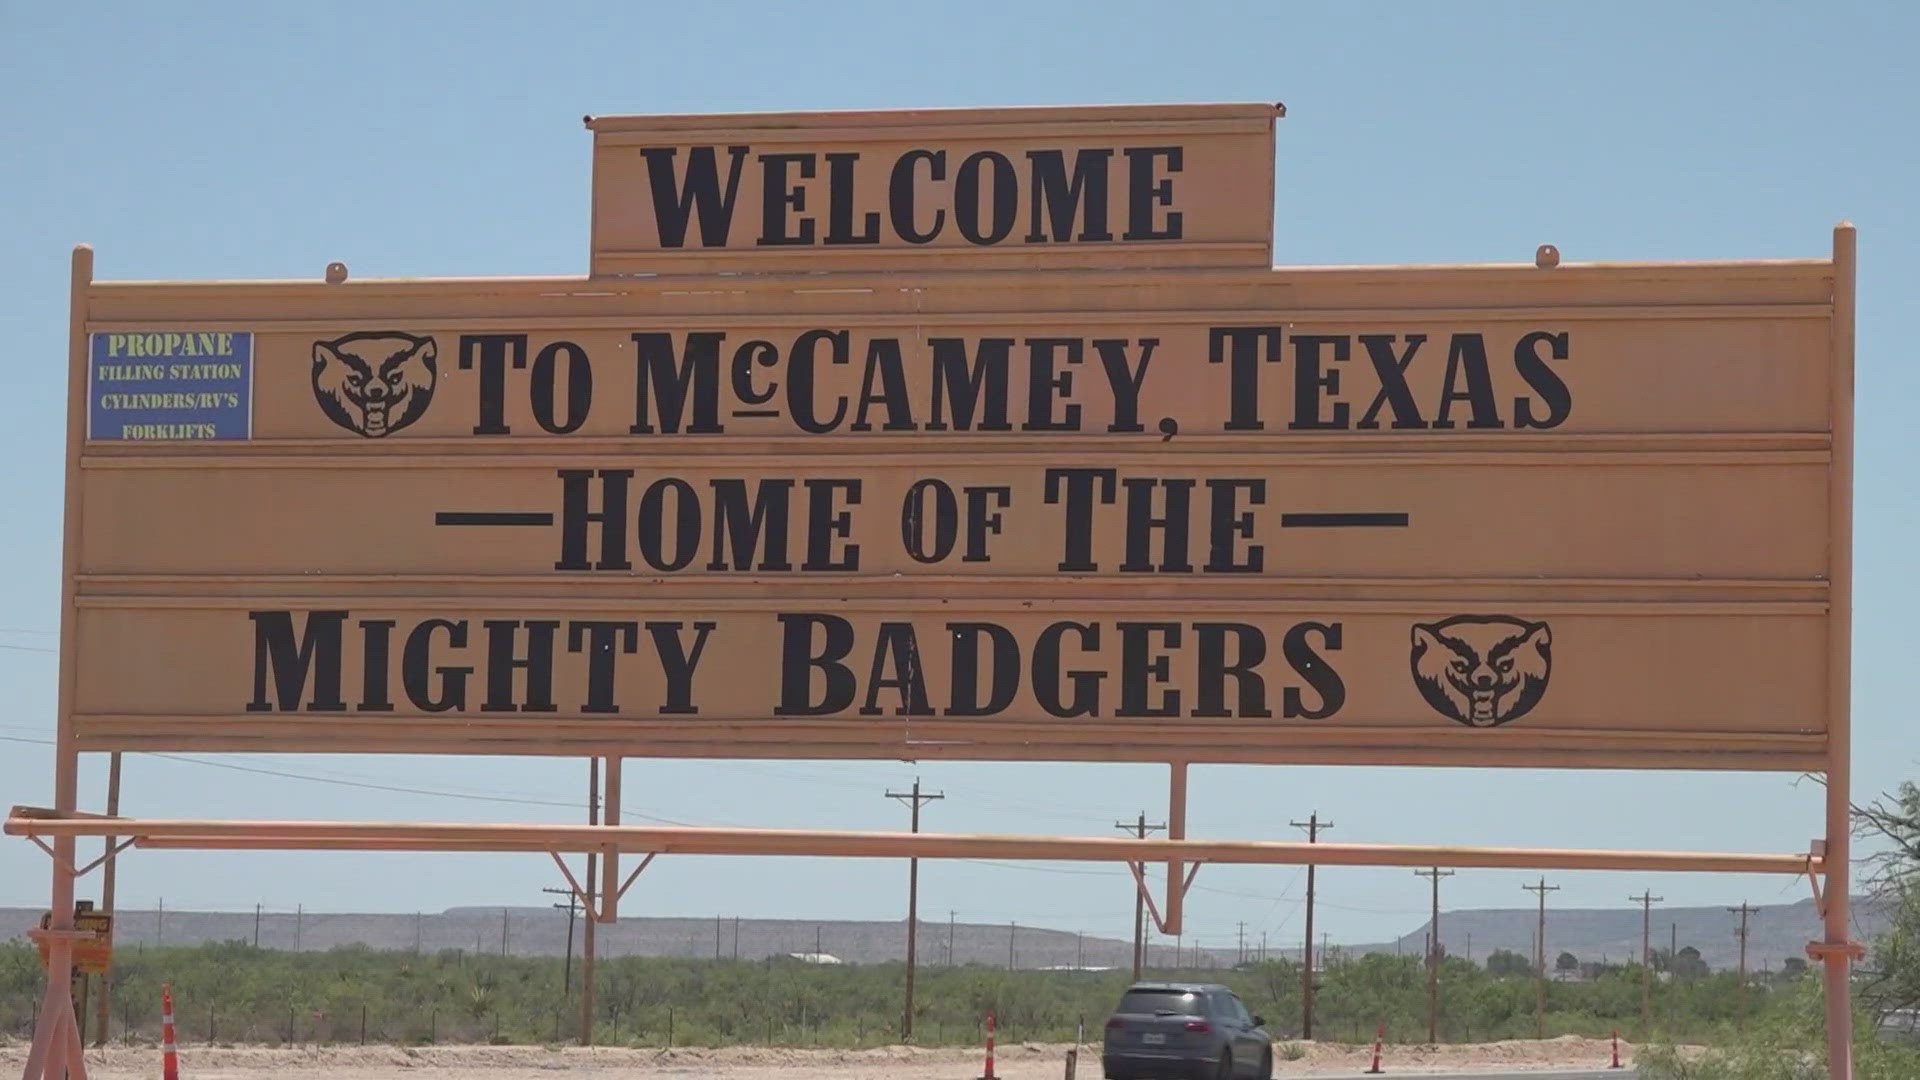 McCamey is a 99-year-old town with a rich history including historical buildings, original homes from the 1930s and a title of the Wind Energy Capital of Texas.